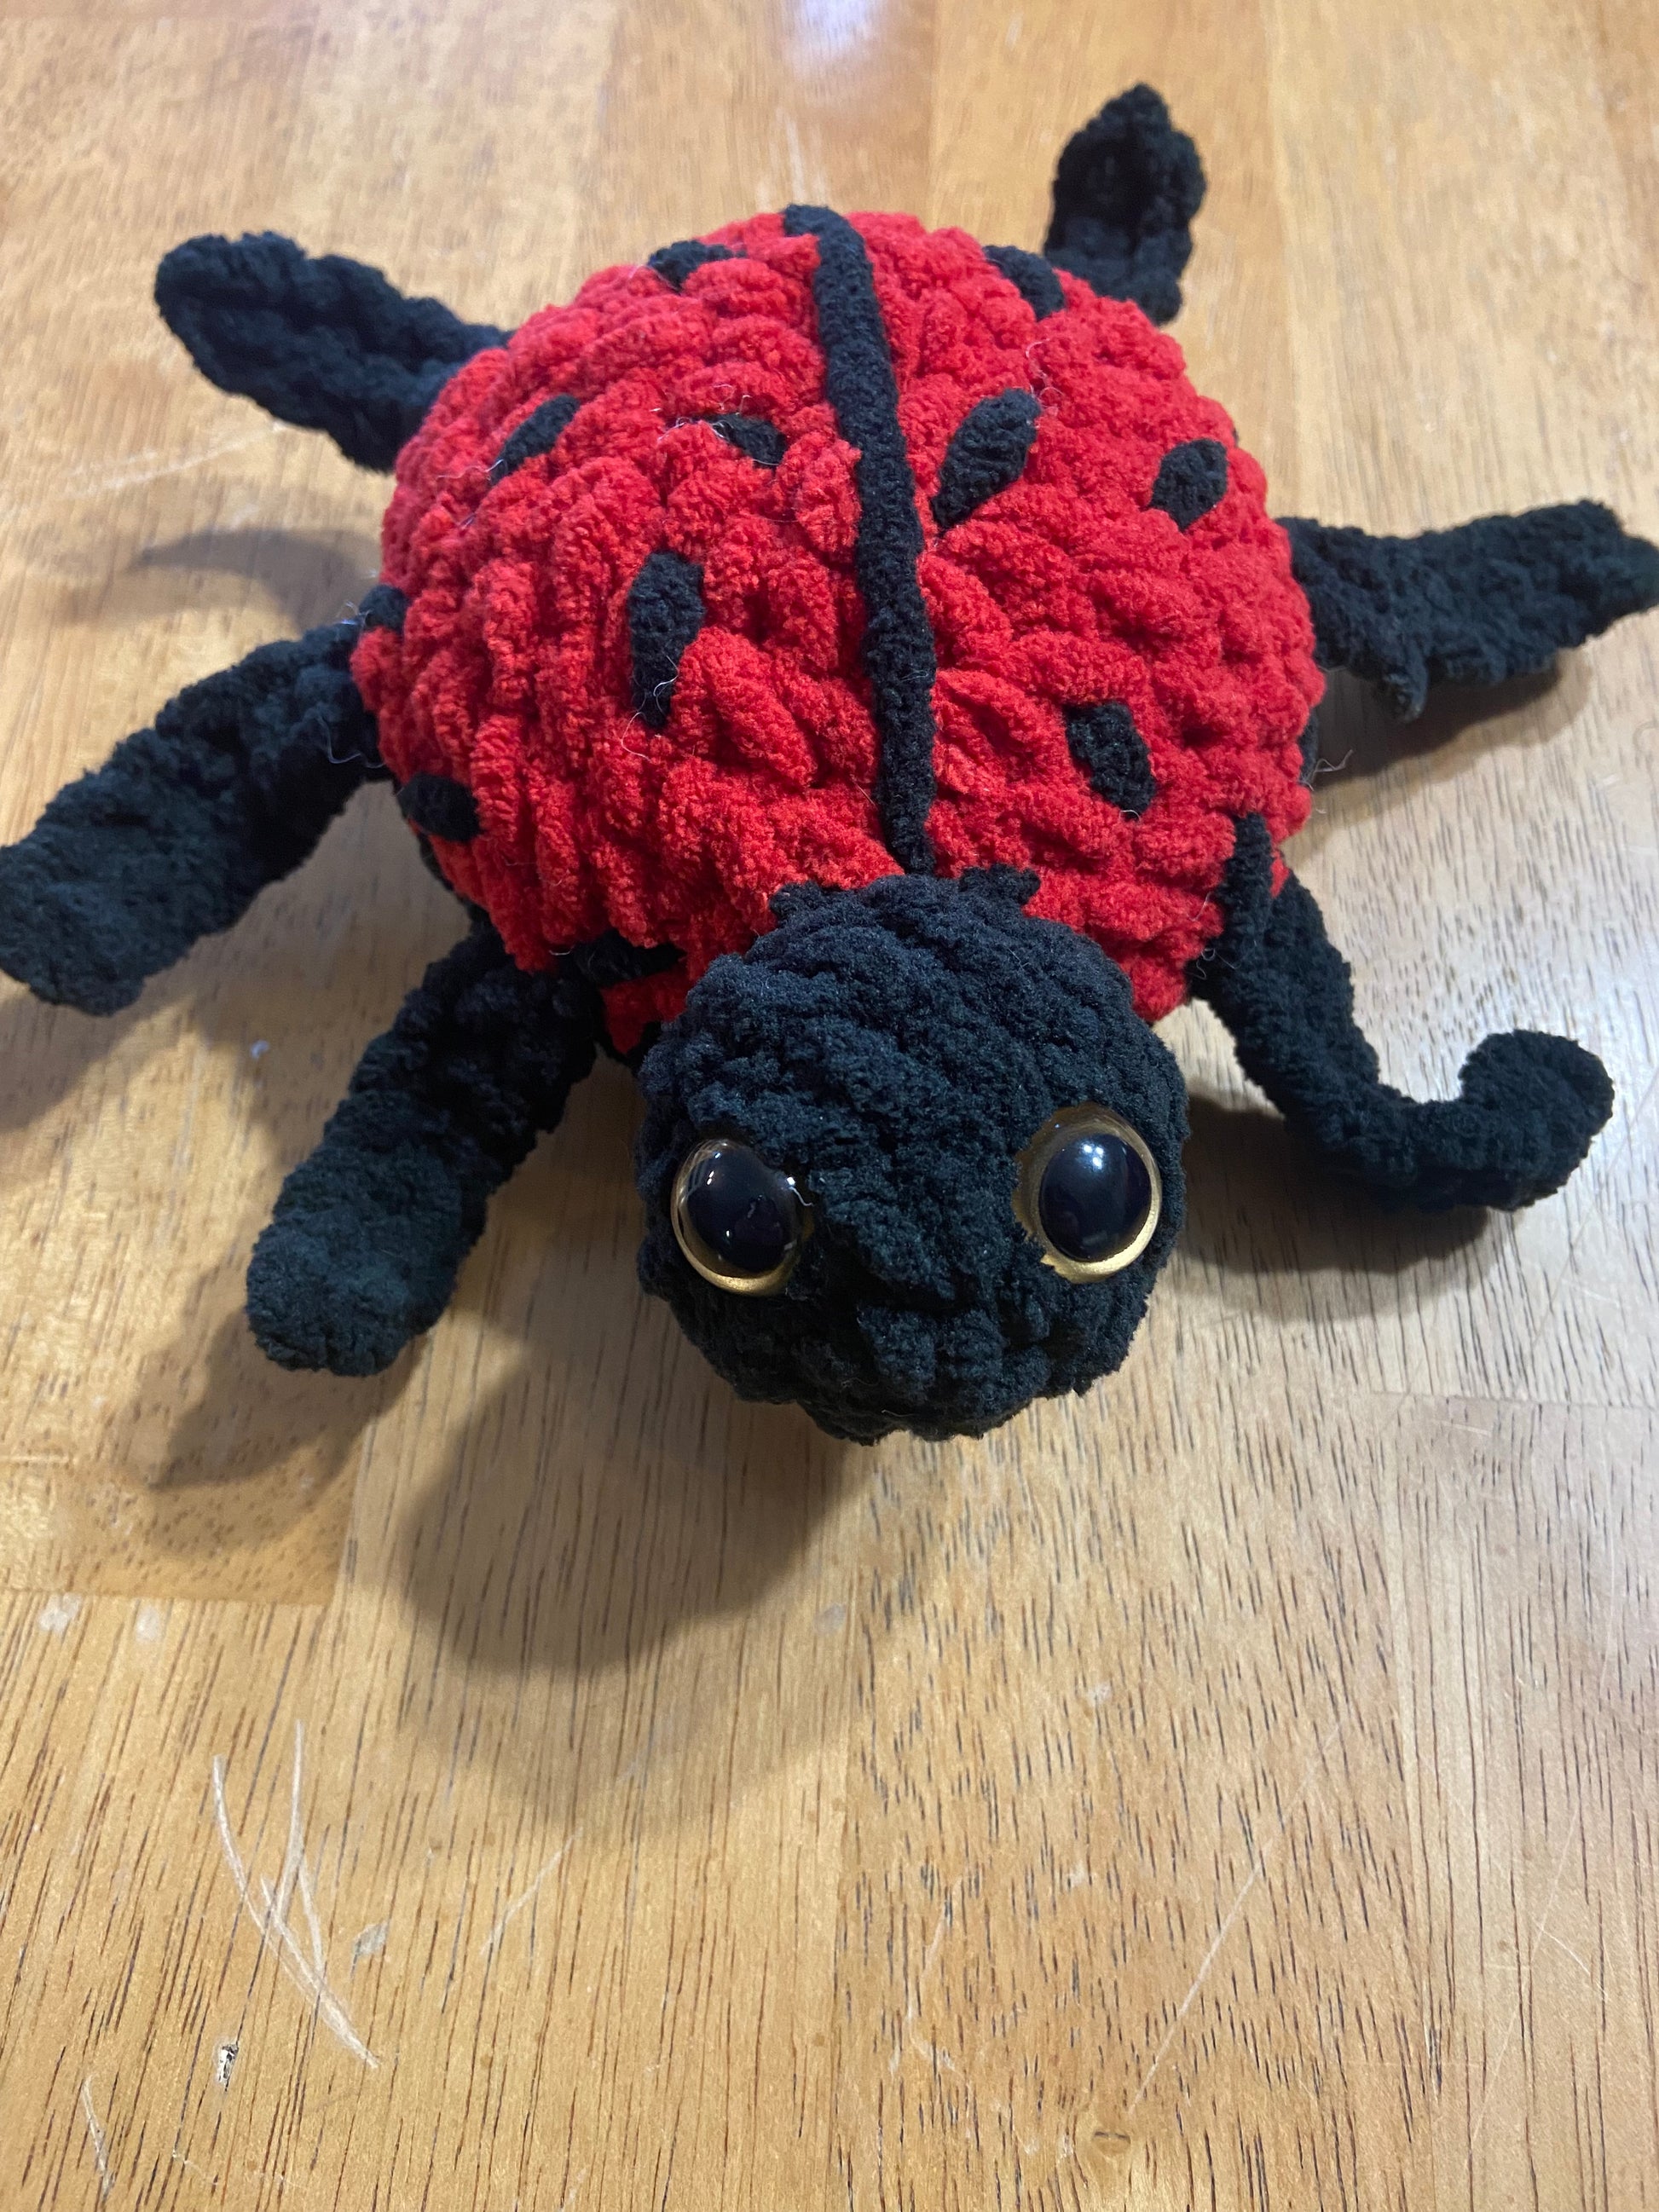 Handmade crochet ladybug plush toy with vibrant red and black colors, intricate crochet detailing, and adorable design.